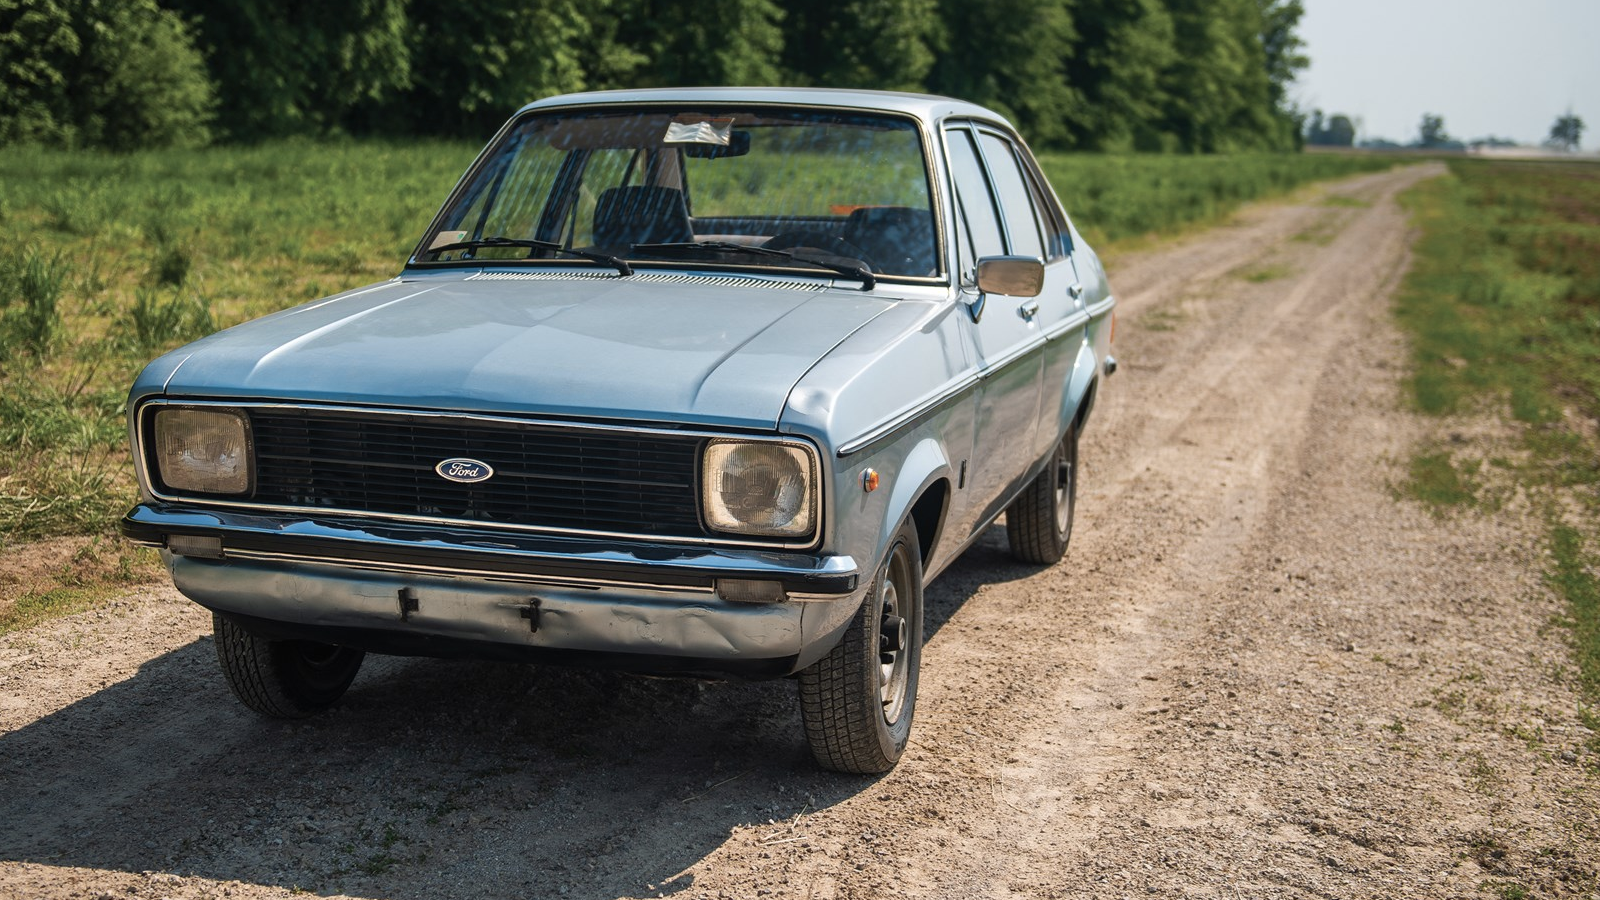 Pope John Paul II's Ford Escort is up for auction